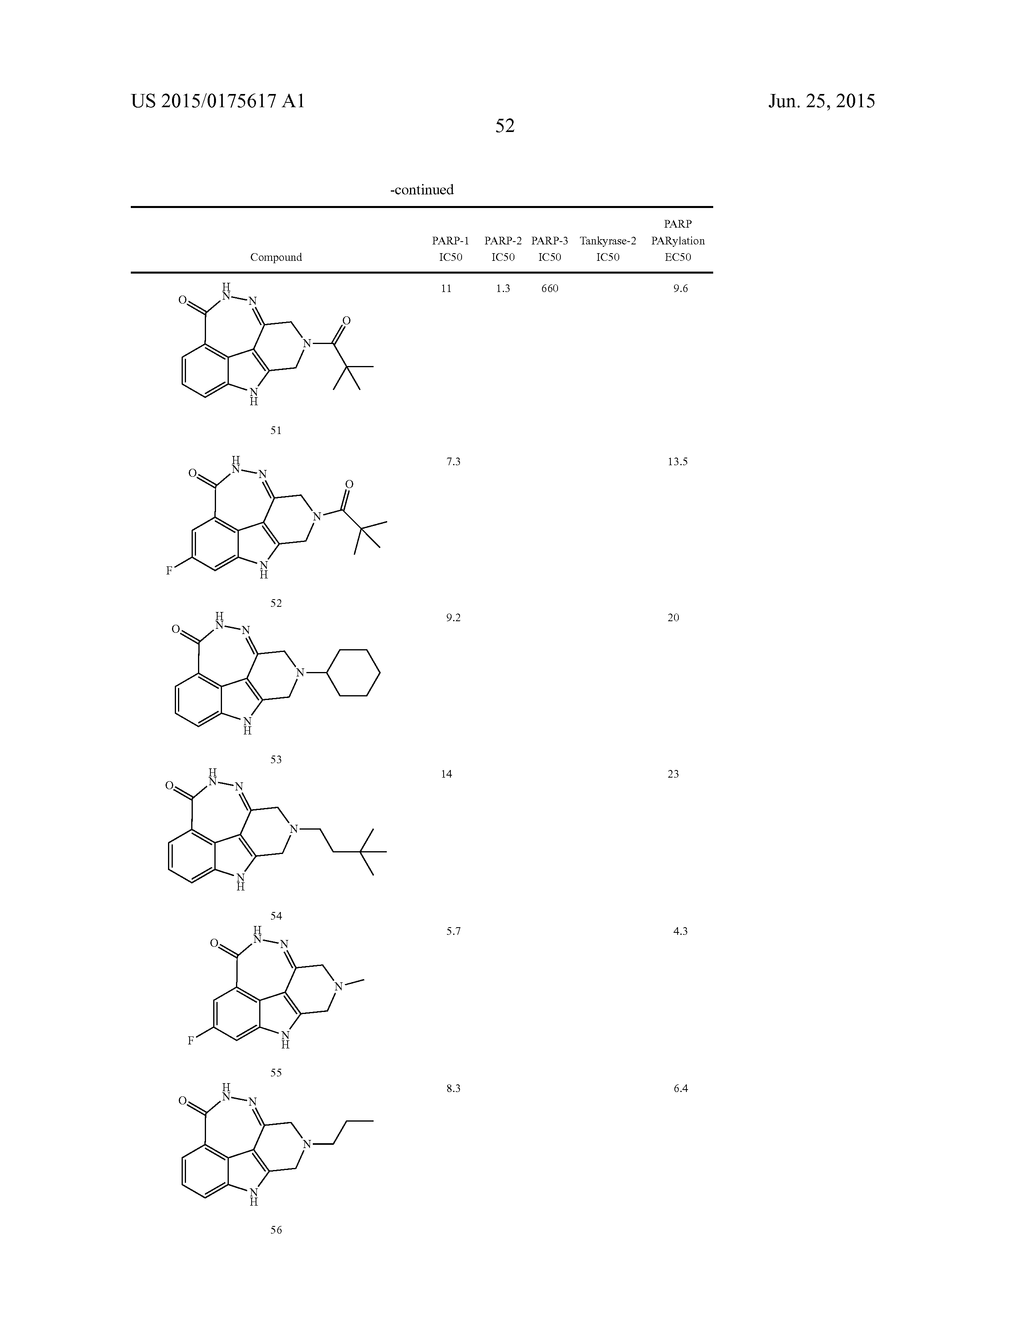 FUSED TETRA OR PENTA-CYCLIC DIHYDRODIAZEPINOCARBAZOLONES AS PARP     INHIBITORS - diagram, schematic, and image 53